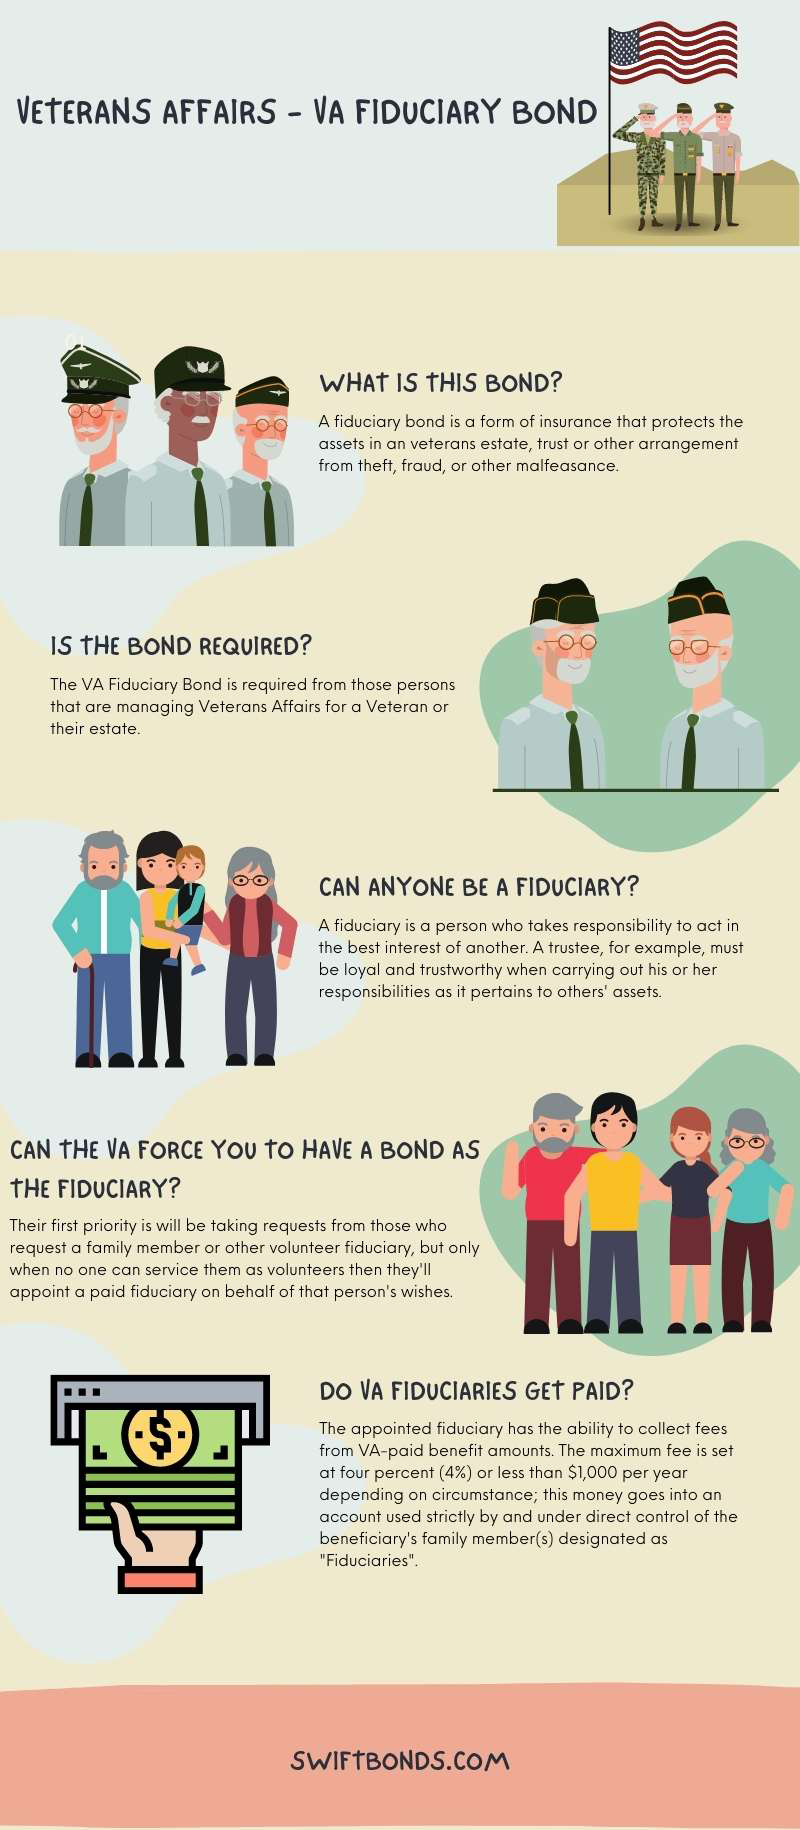 Veterans Affairs - VA Fiduciary Bond - This is a simple infographic image of a Fiduciary Bond. Images of veteran soldiers and their families with a multi colored background.